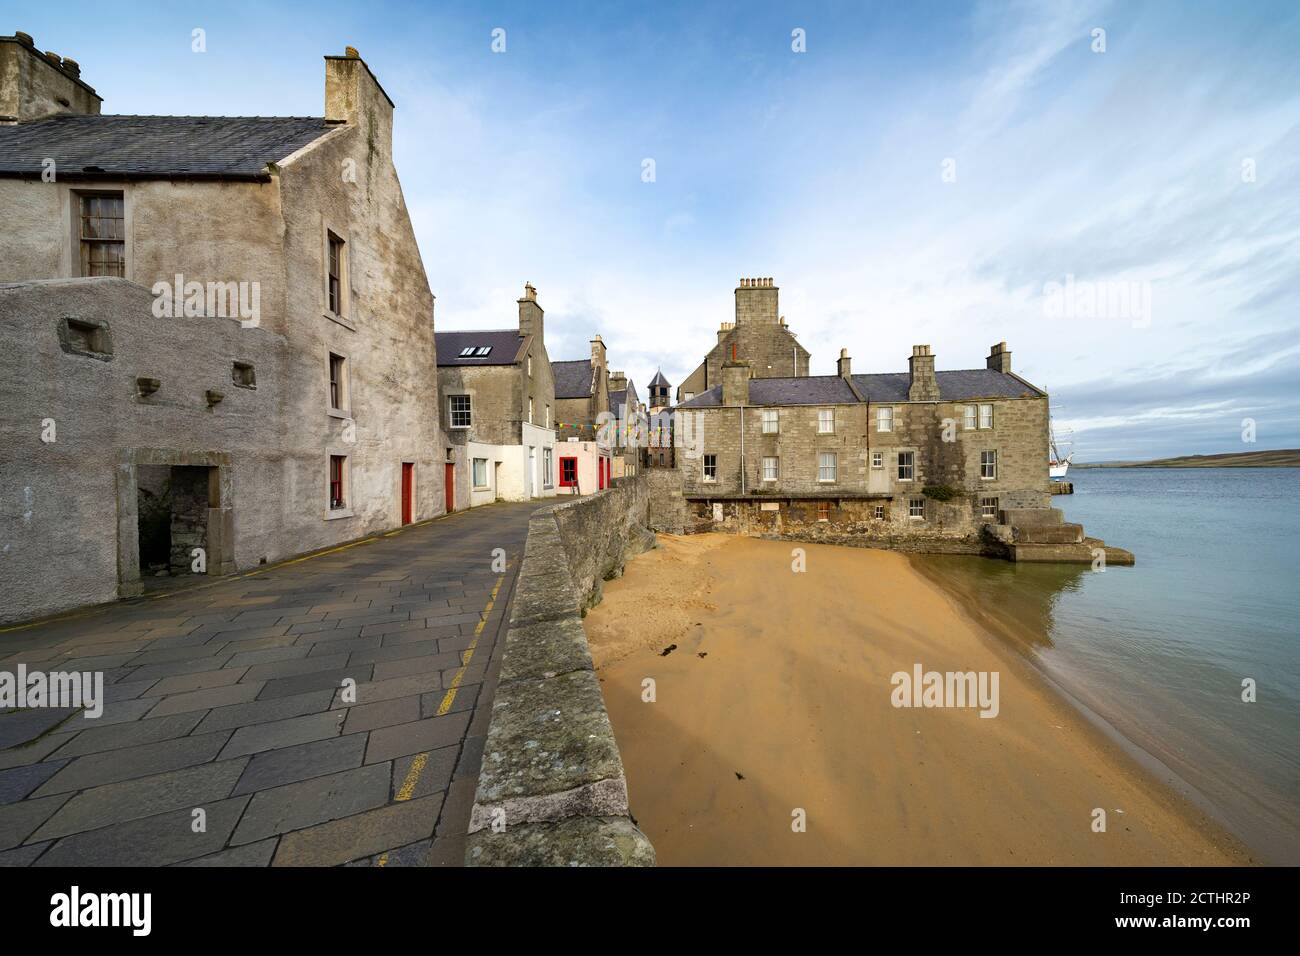 View of Bain's Beach on Commercial Street  in old town of Lerwick, Shetland Isles, Scotland, UK Stock Photo